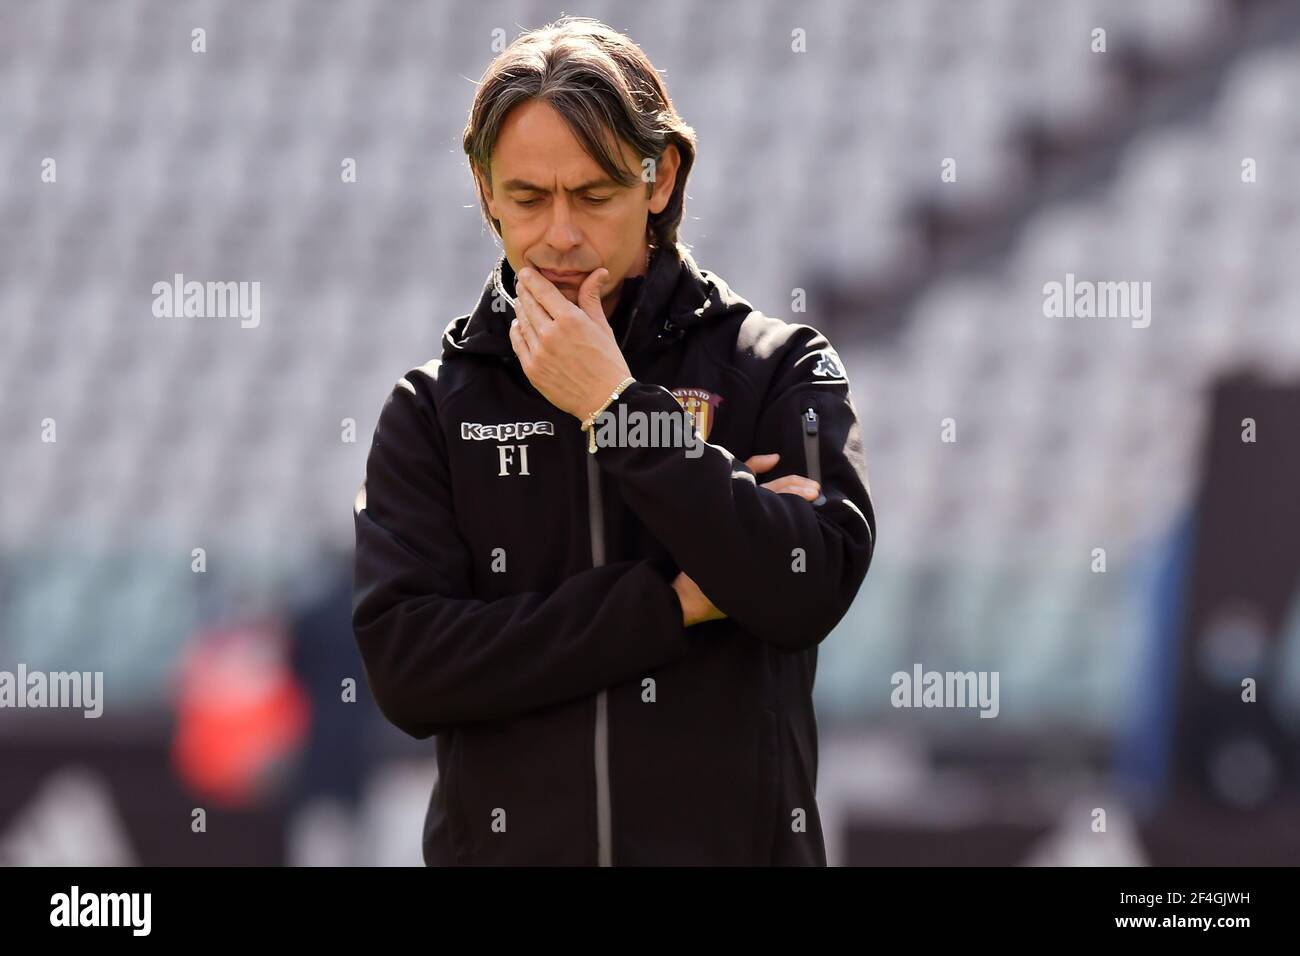 Turin, Italy. 21st Mar, 2021. Filippo Inzaghi coach of Benevento Calcio reacts prior to the Serie A football match between Juventus FC and Benevento Calcio at Allianz stadium in Torino (Italy), March 21th, 2021. Photo Giuliano Marchisciano/OnePlusNine/Insidefoto Credit: insidefoto srl/Alamy Live News Stock Photo